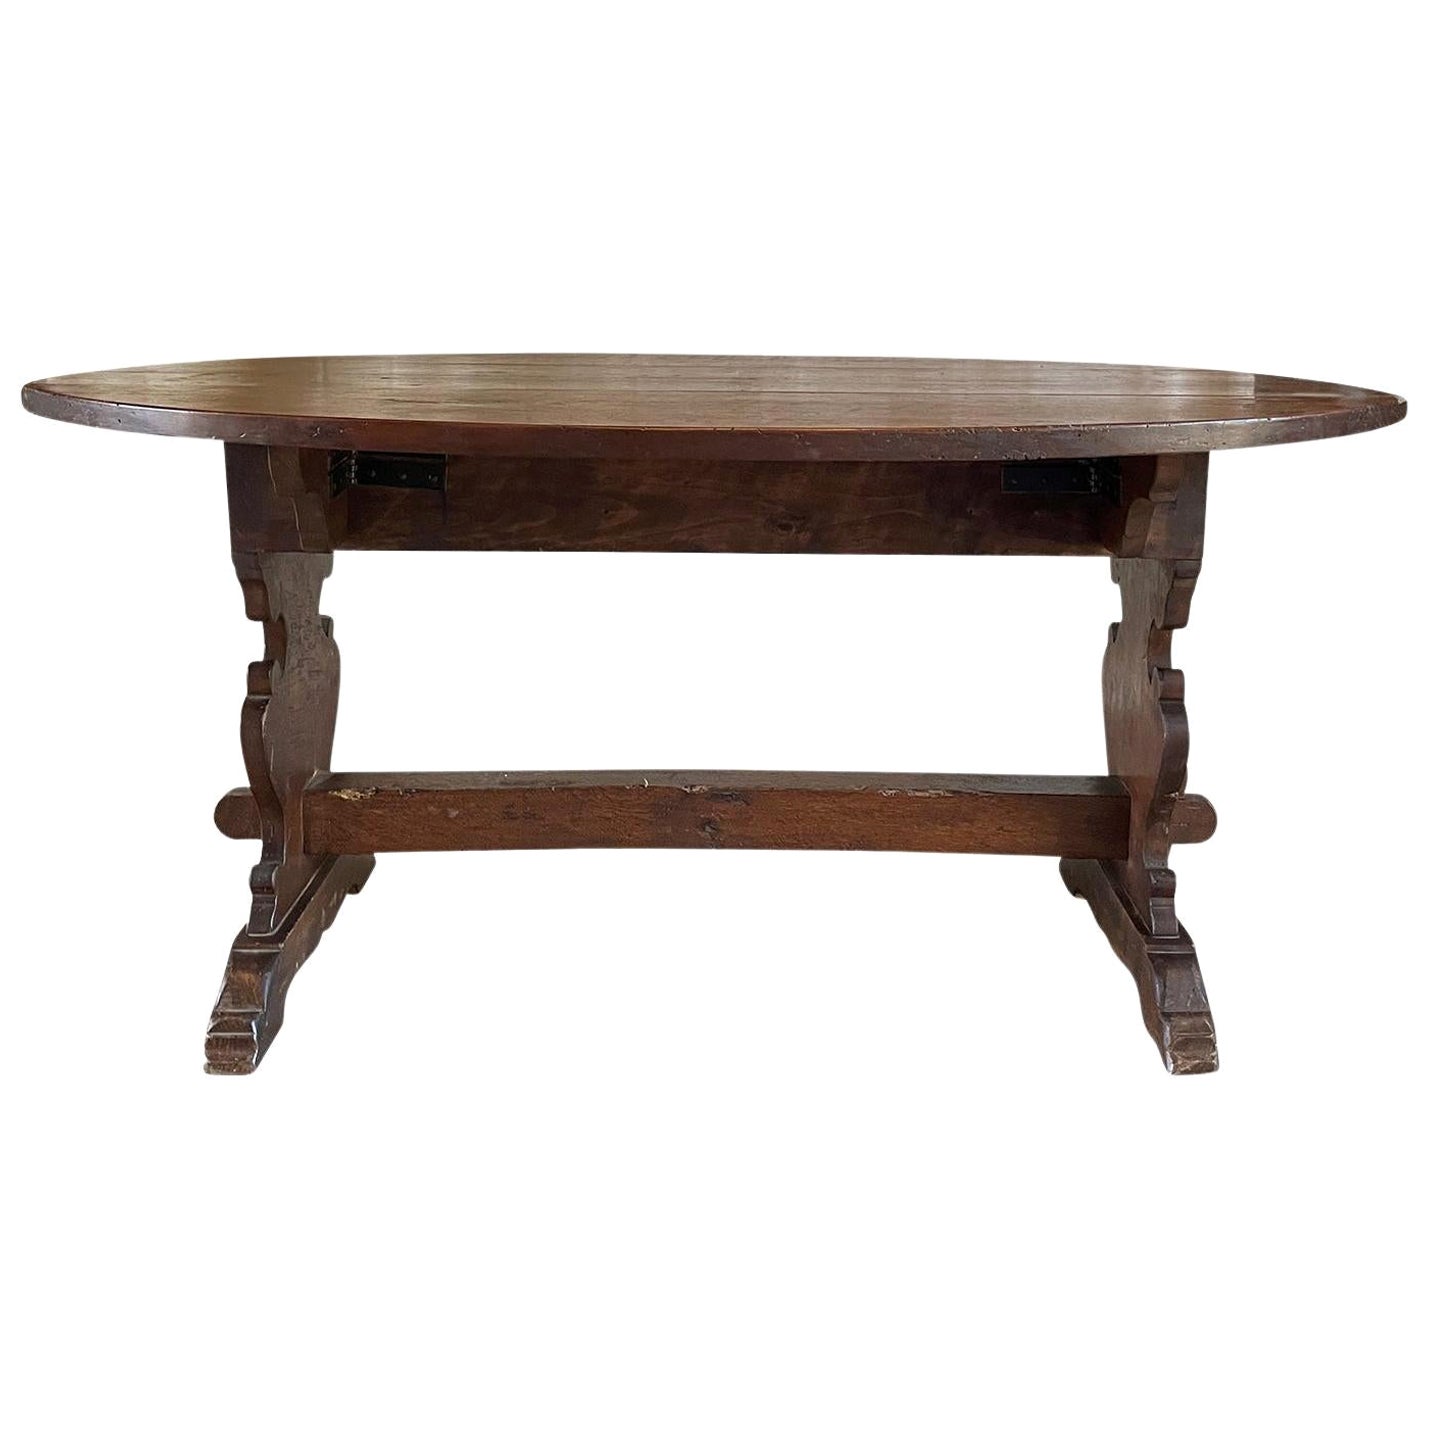 19th Century Italian Antique Oval Drop Leaf Table, Tuscan Dining Room Table For Sale